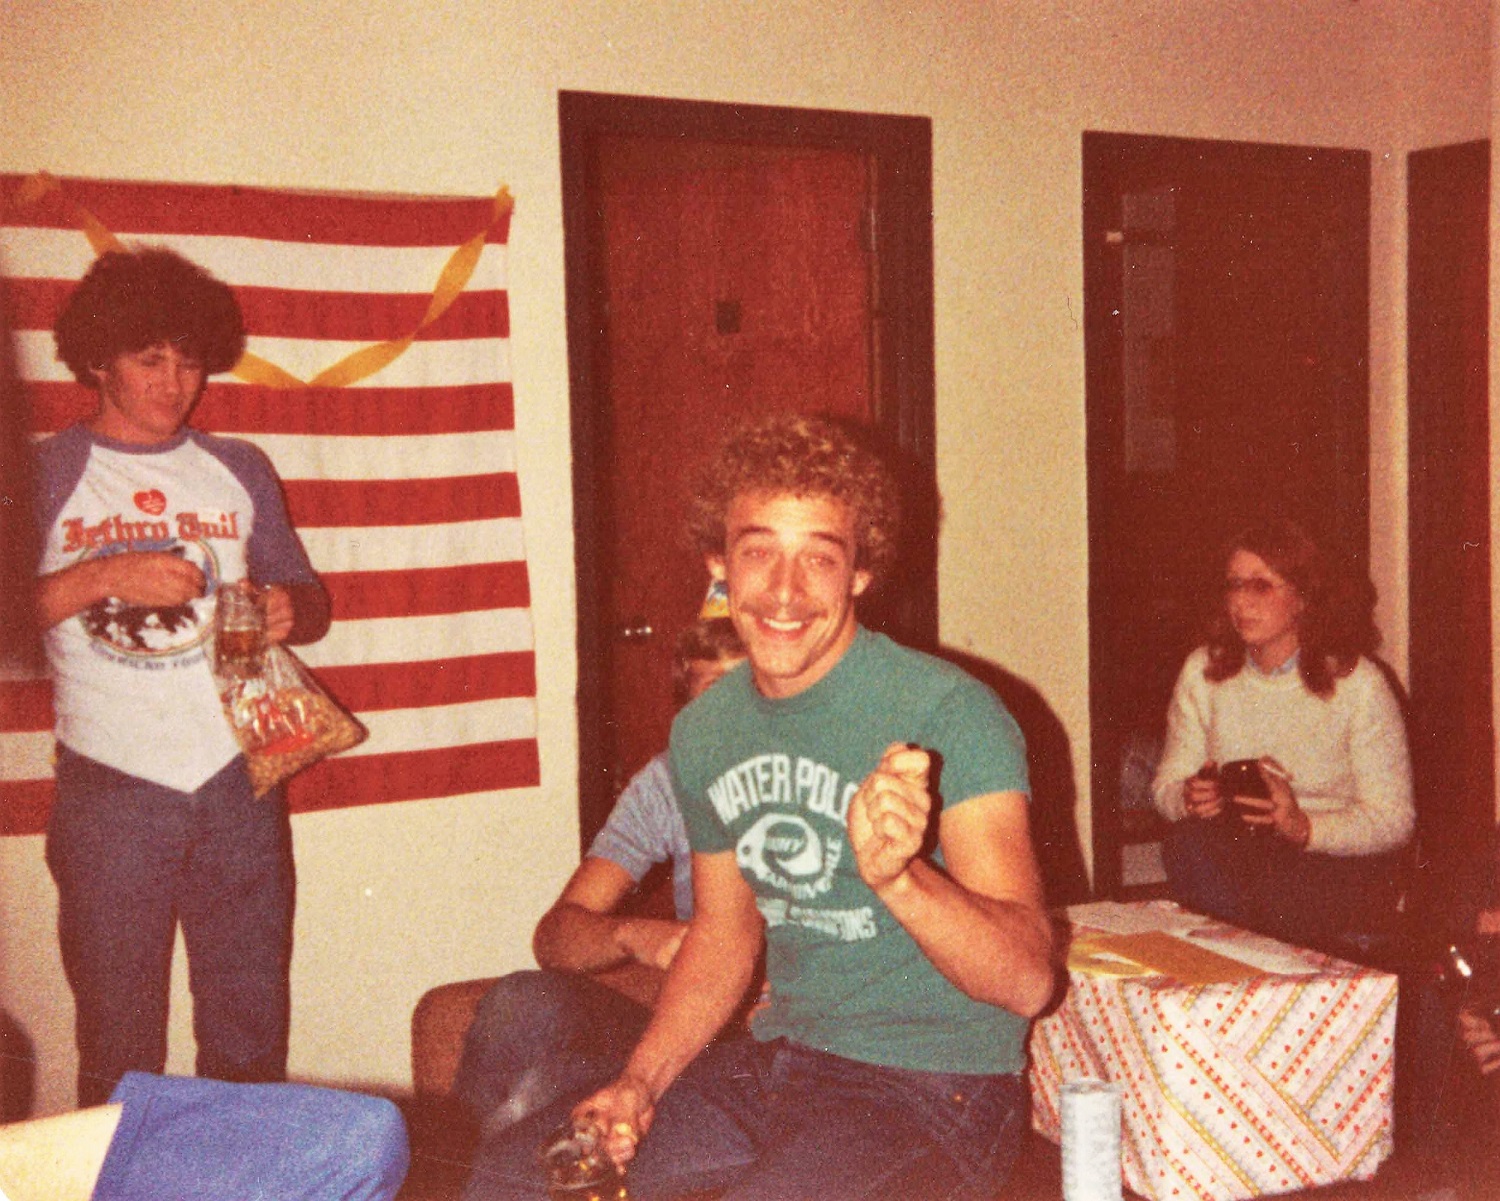 Fall 1980 Perry Hall Room 201 C